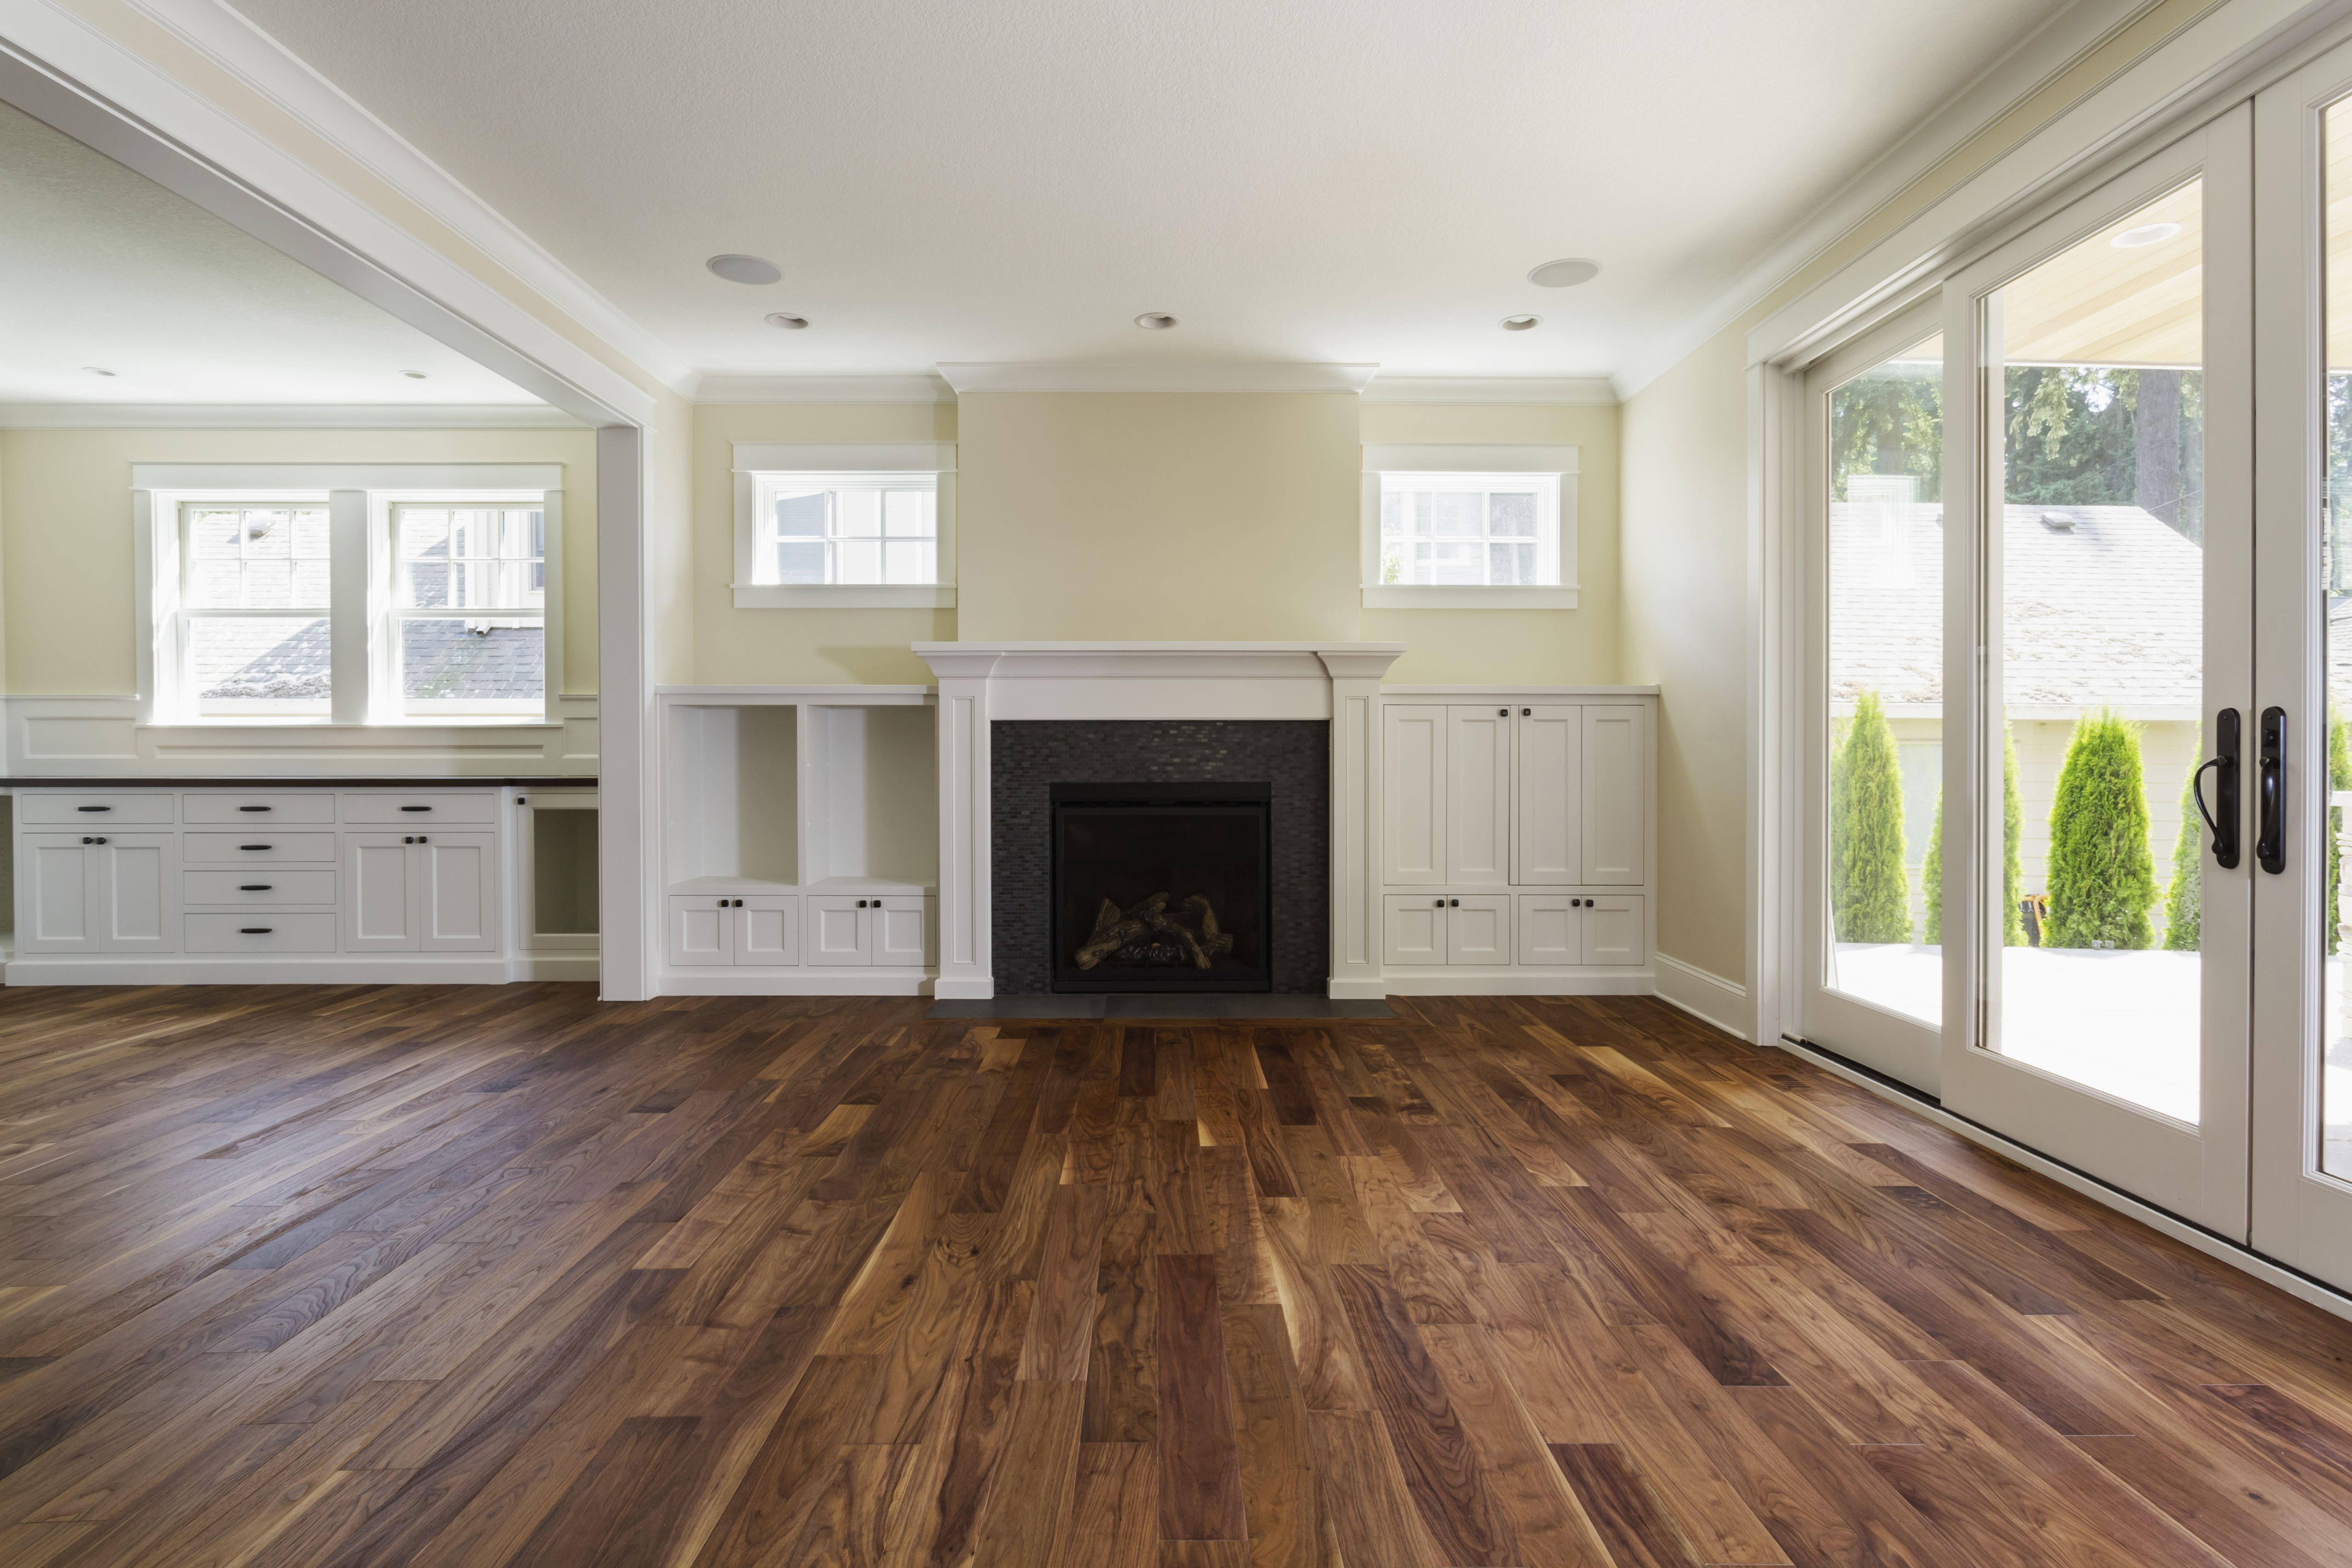 13 Nice Bruce Hardwood Floor Cleaning Pads 2024 free download bruce hardwood floor cleaning pads of the pros and cons of prefinished hardwood flooring regarding fireplace and built in shelves in living room 482143011 57bef8e33df78cc16e035397